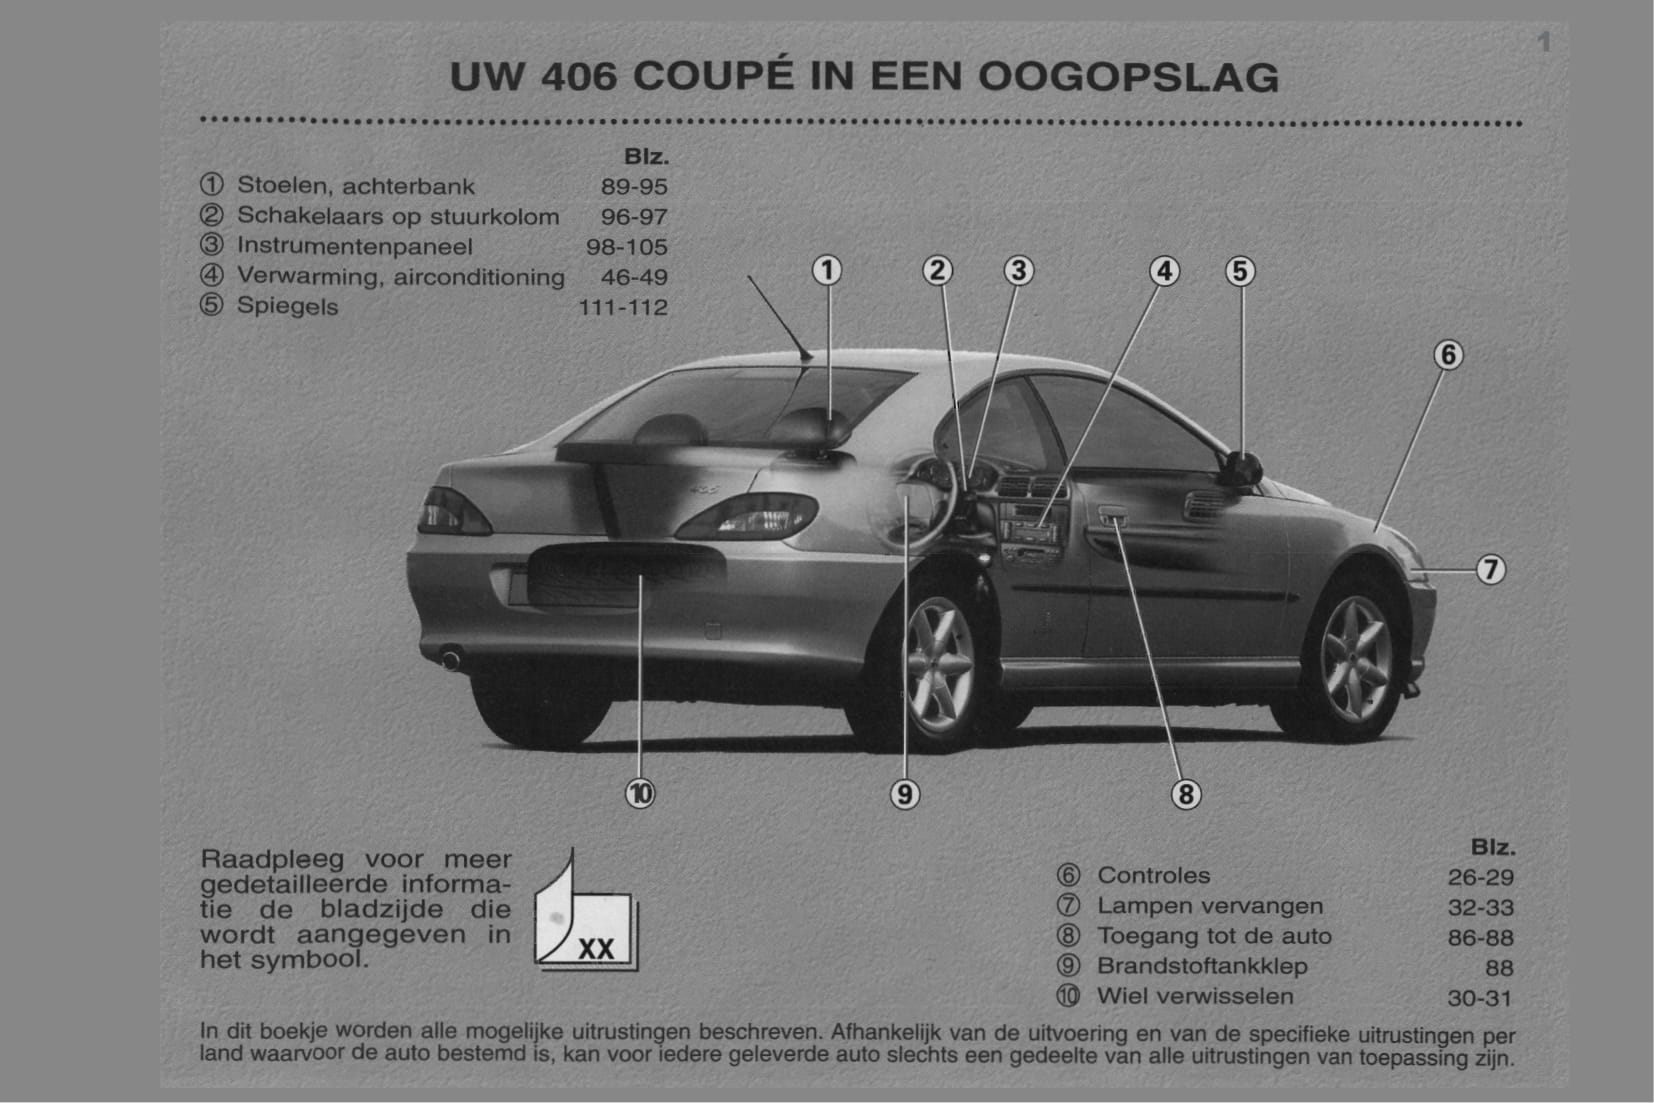 Your brief but informative guide to the gorgeous Peugeot 406 Coupe